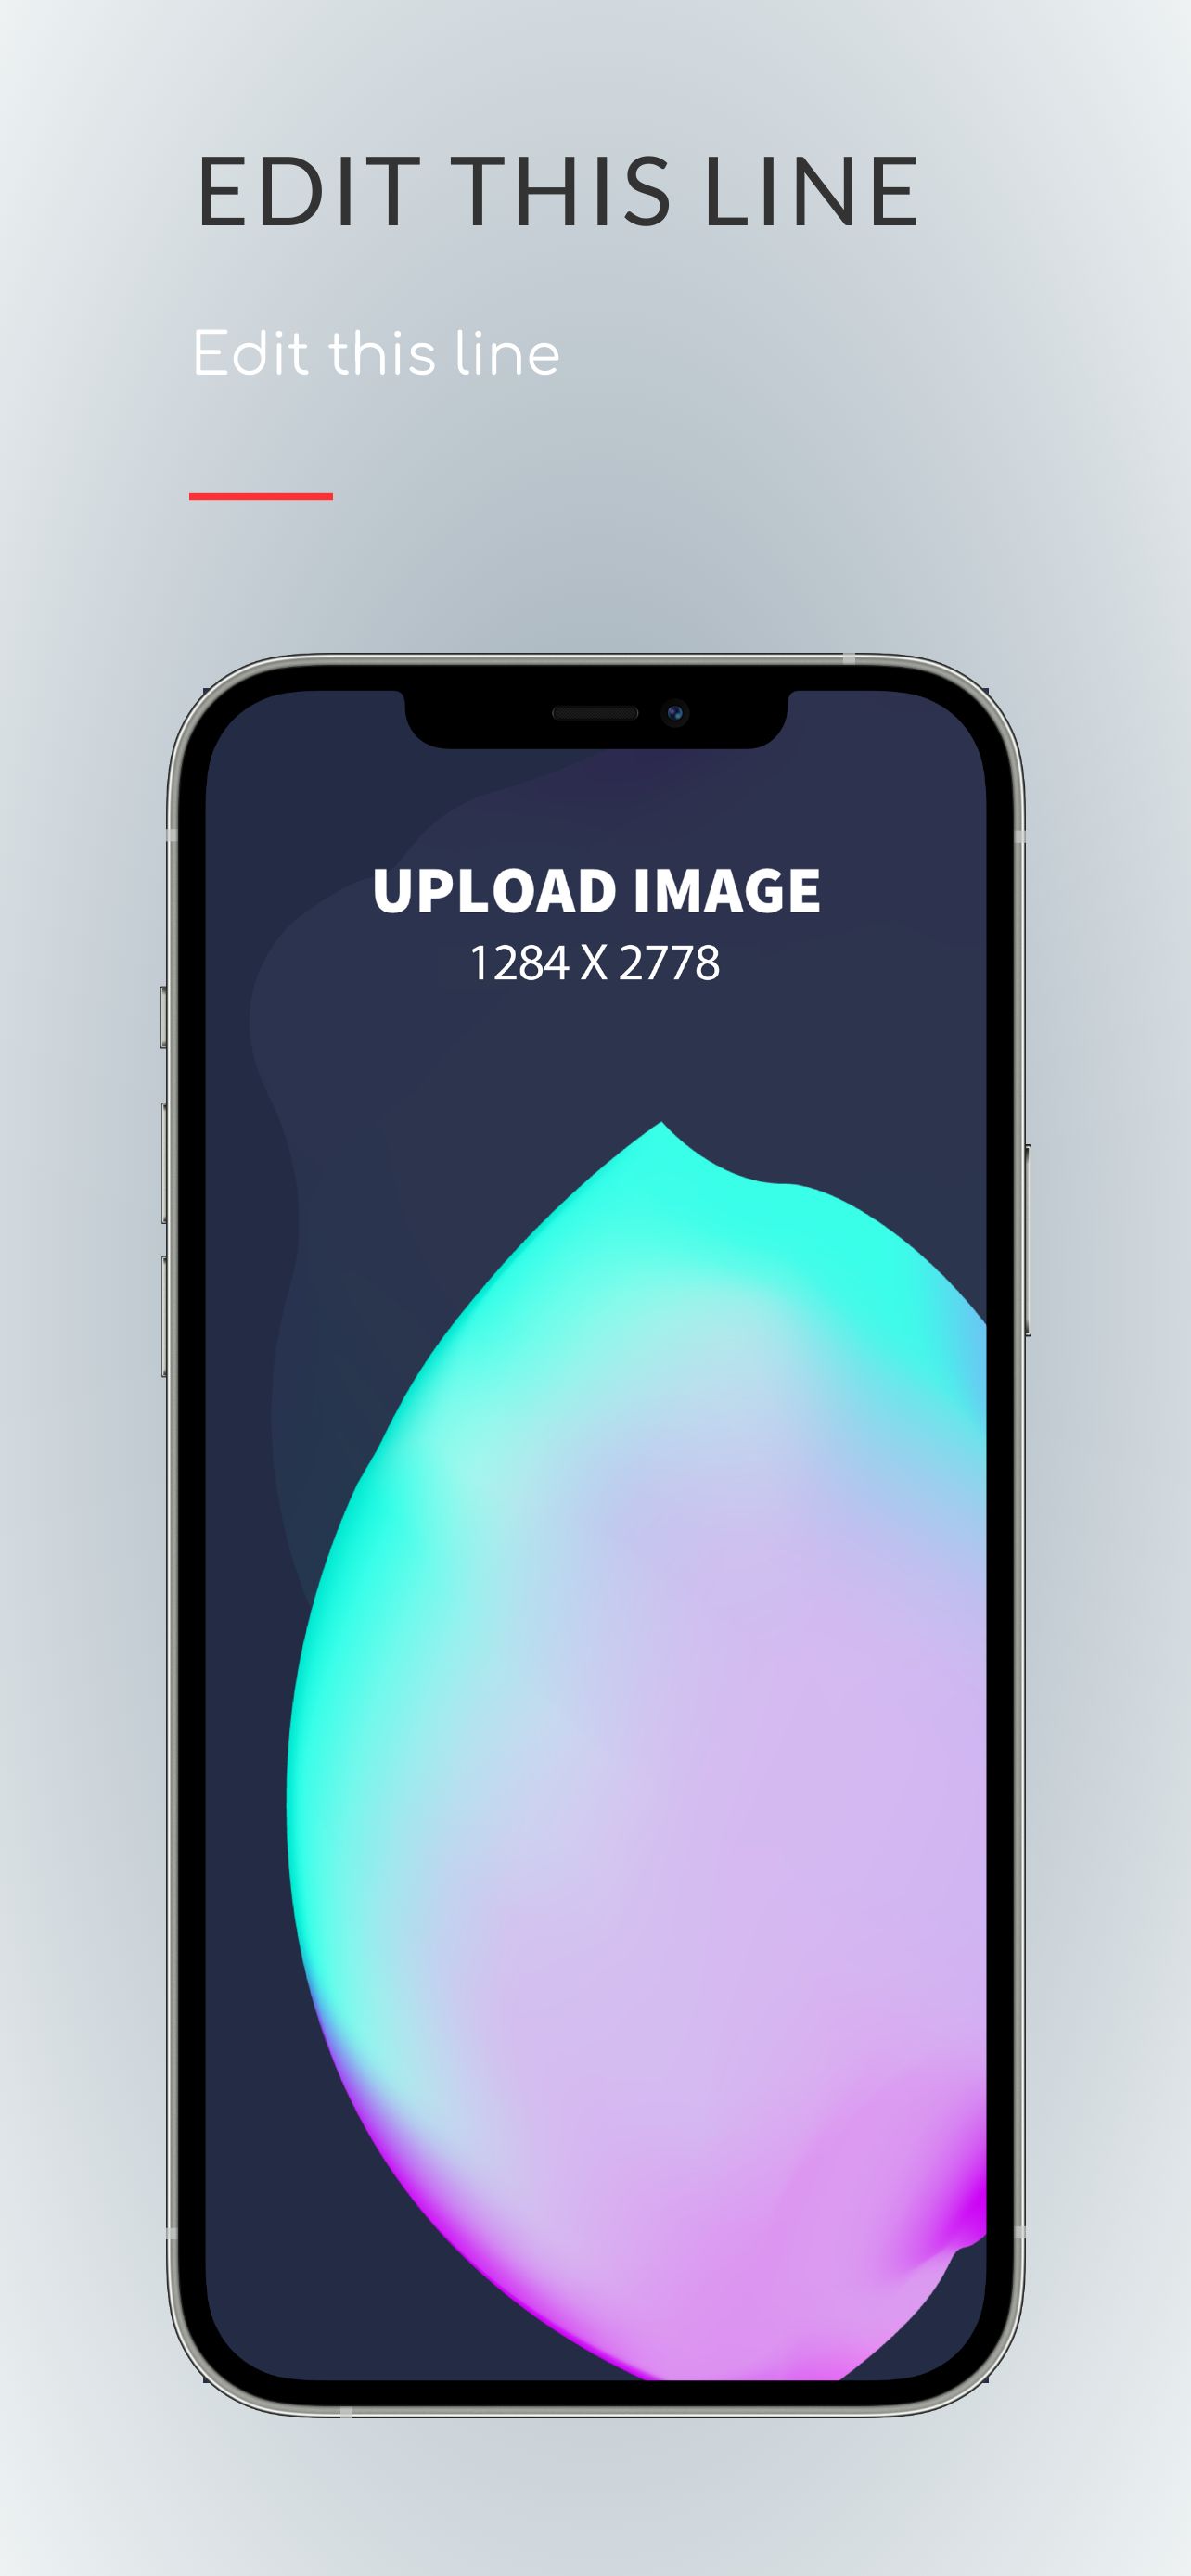 iPhone 12 Pro Max Screenshot 5 template. Quickly edit text, colors, images, and more for free.